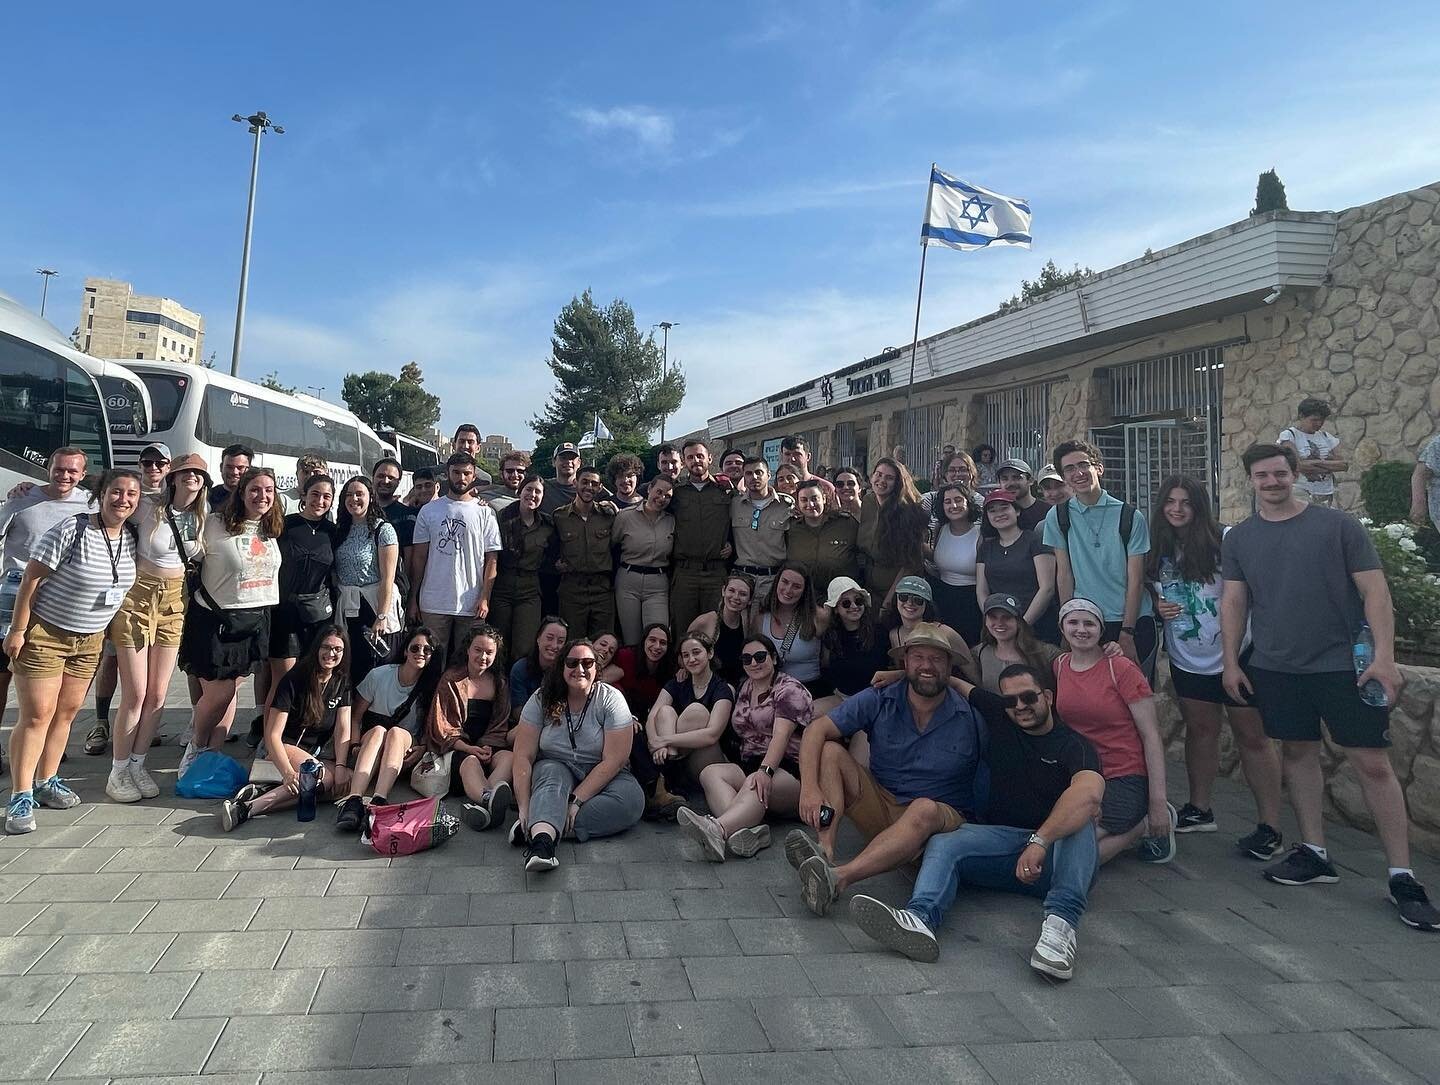 We&rsquo;ve been so busy, there hasn&rsquo;t been time to post days 6, 7 and 8! 

After shabbat we went to Yad Vashem and Har Herzl. Then we made our way to Masada, went up and down via the cable car and floated in the Dead Sea! 

We are ending our t